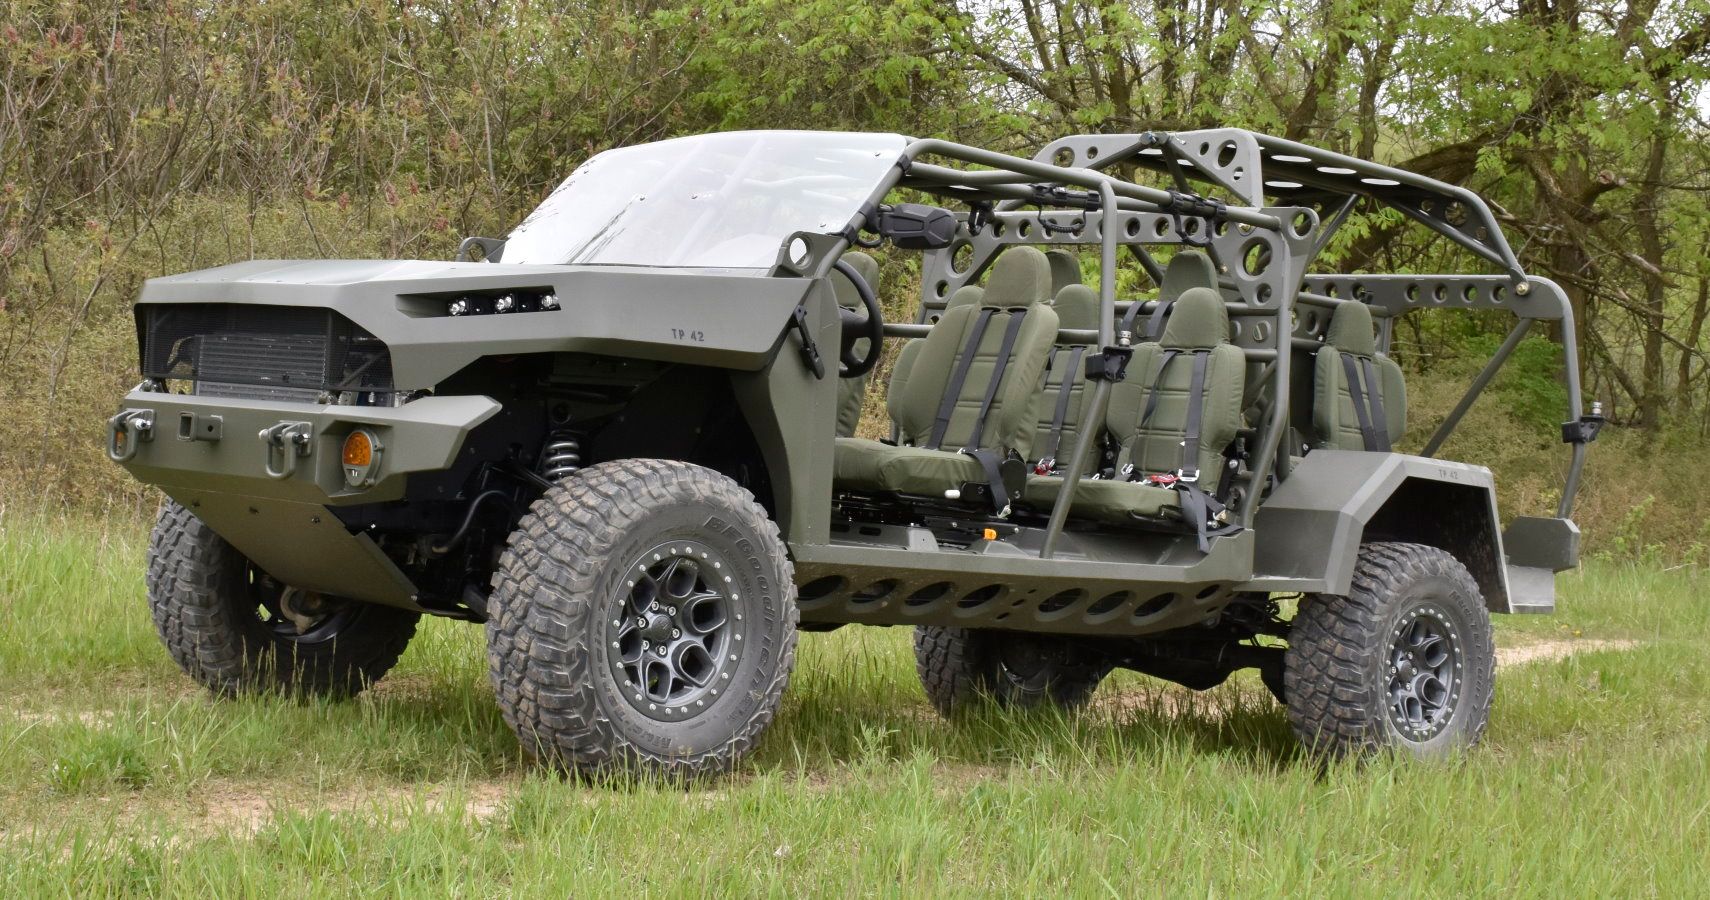 GM Defense creates a Chevy Colorado ISV prototype to compete for a U.S. Army contract.